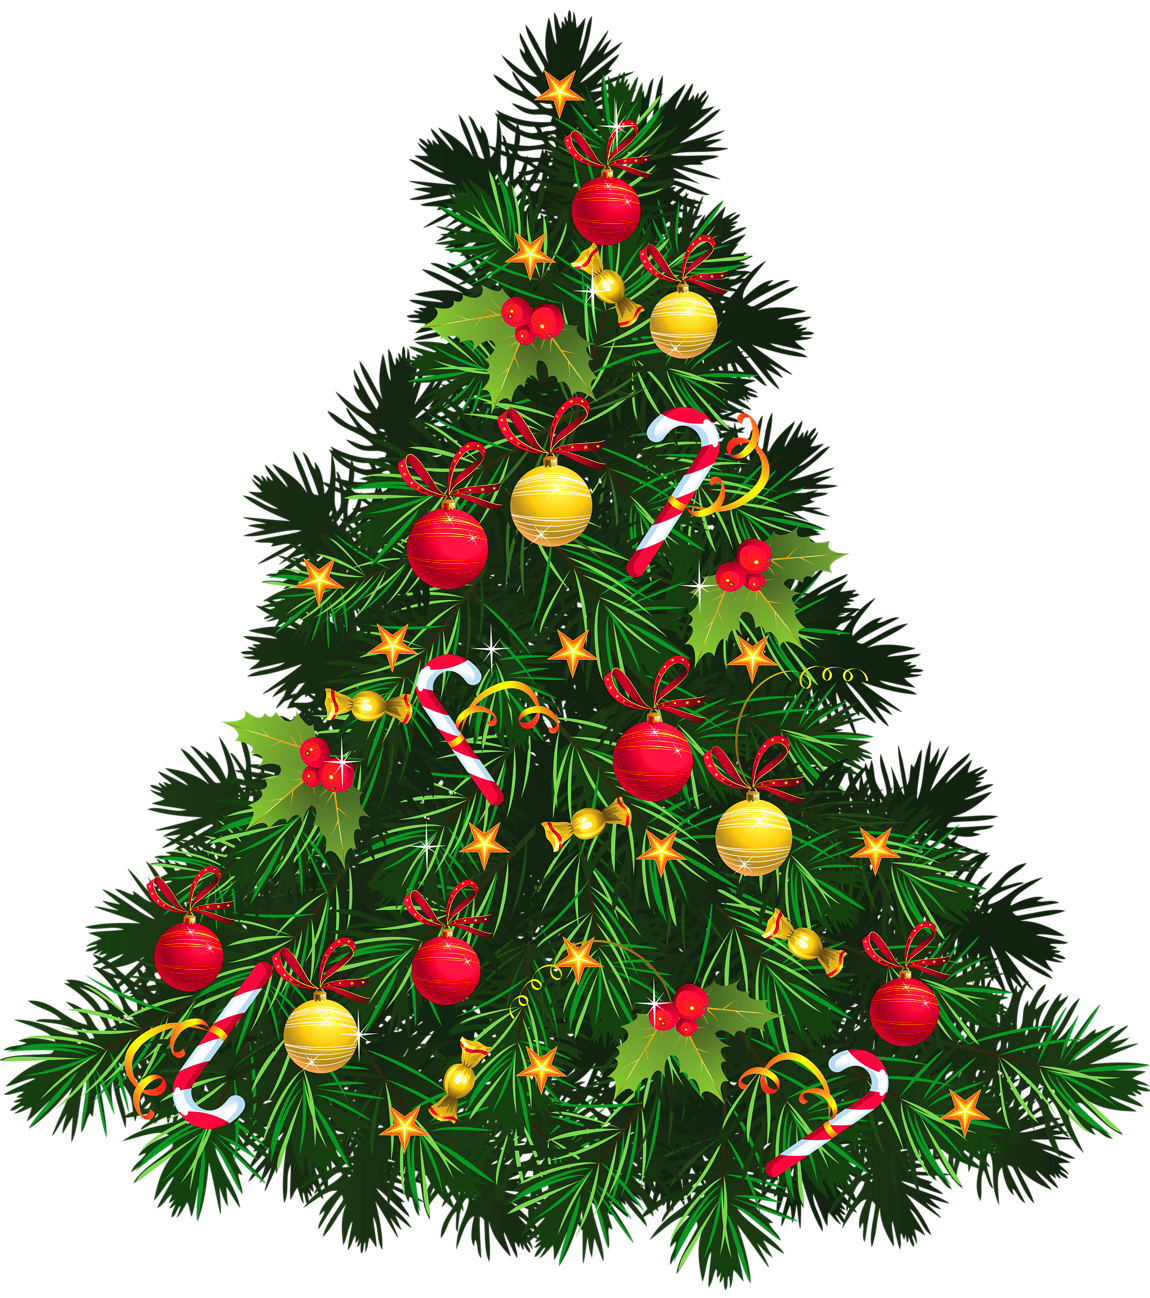 free clipart images of christmas trees - photo #43